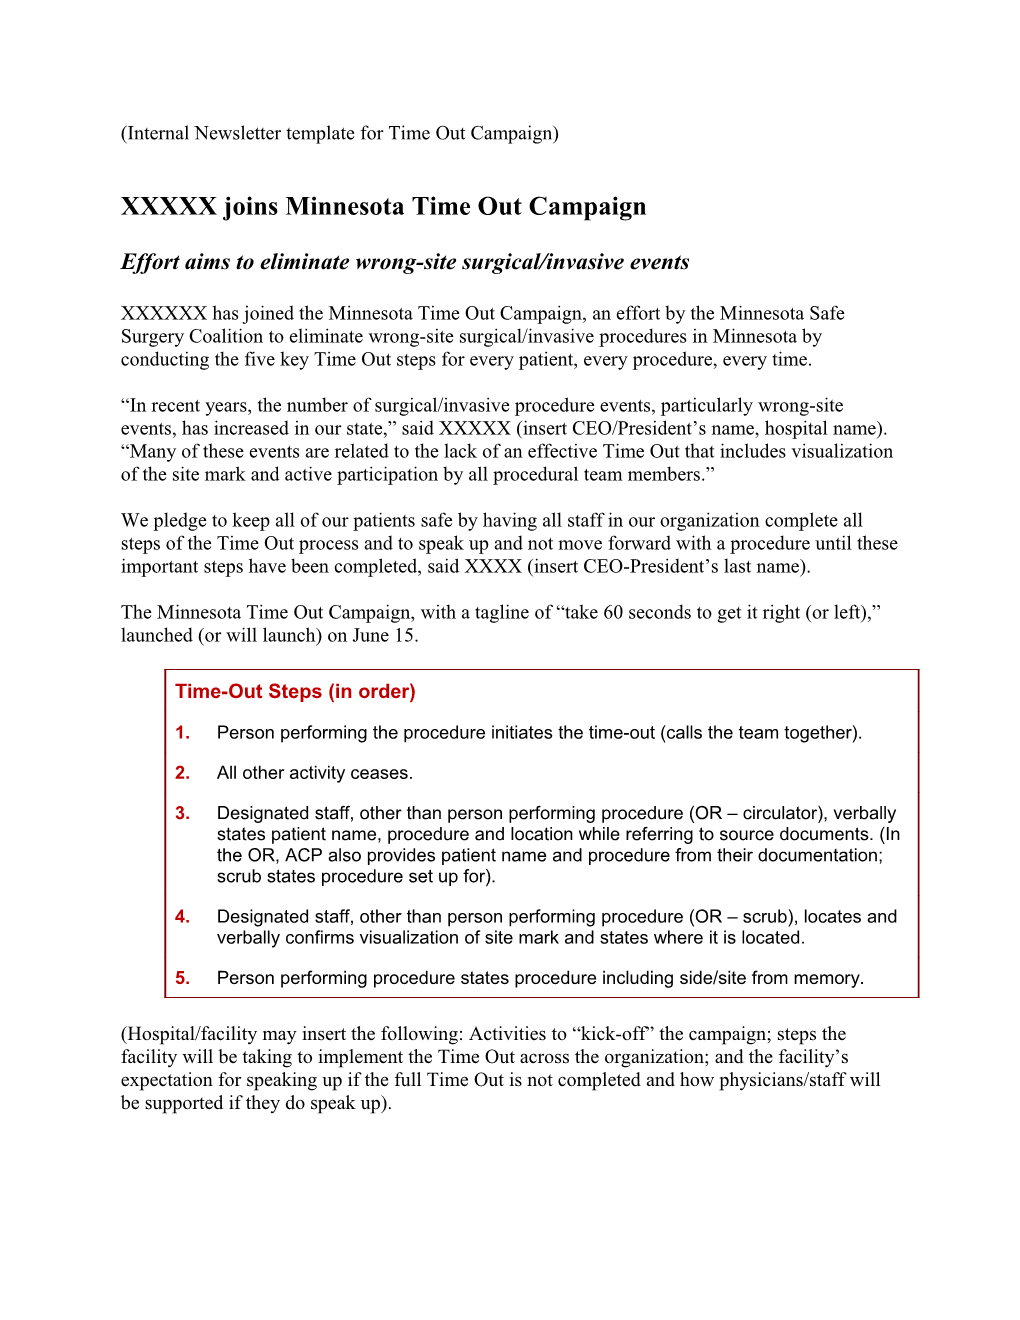 Internal Newsletter Template for Time out Campaign